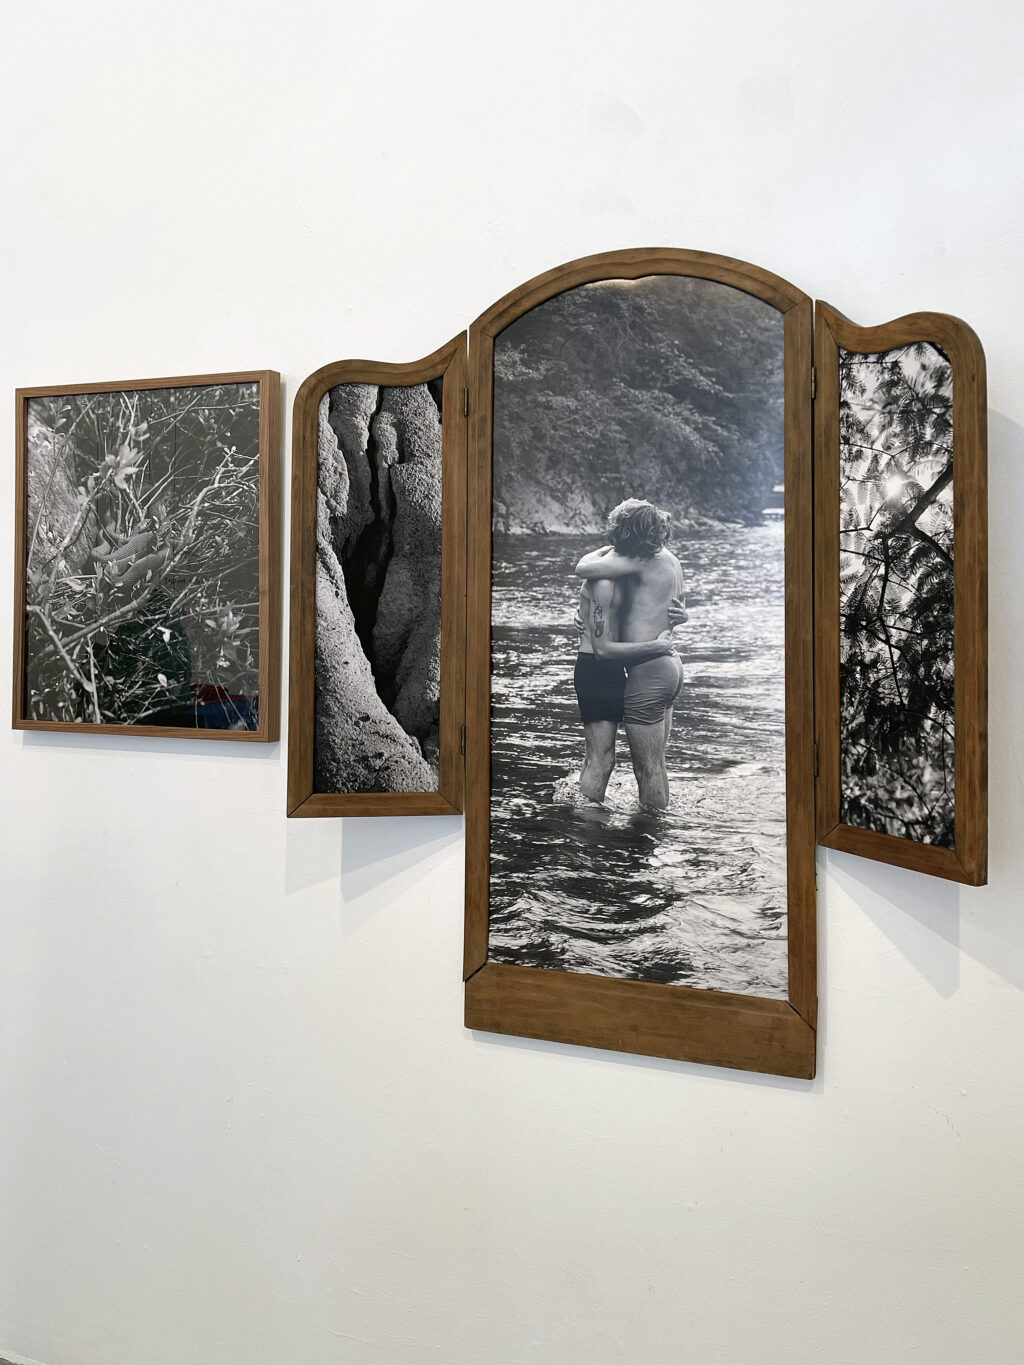 Framed photographs including a figure holding each other in a creek by Owen McCarter.